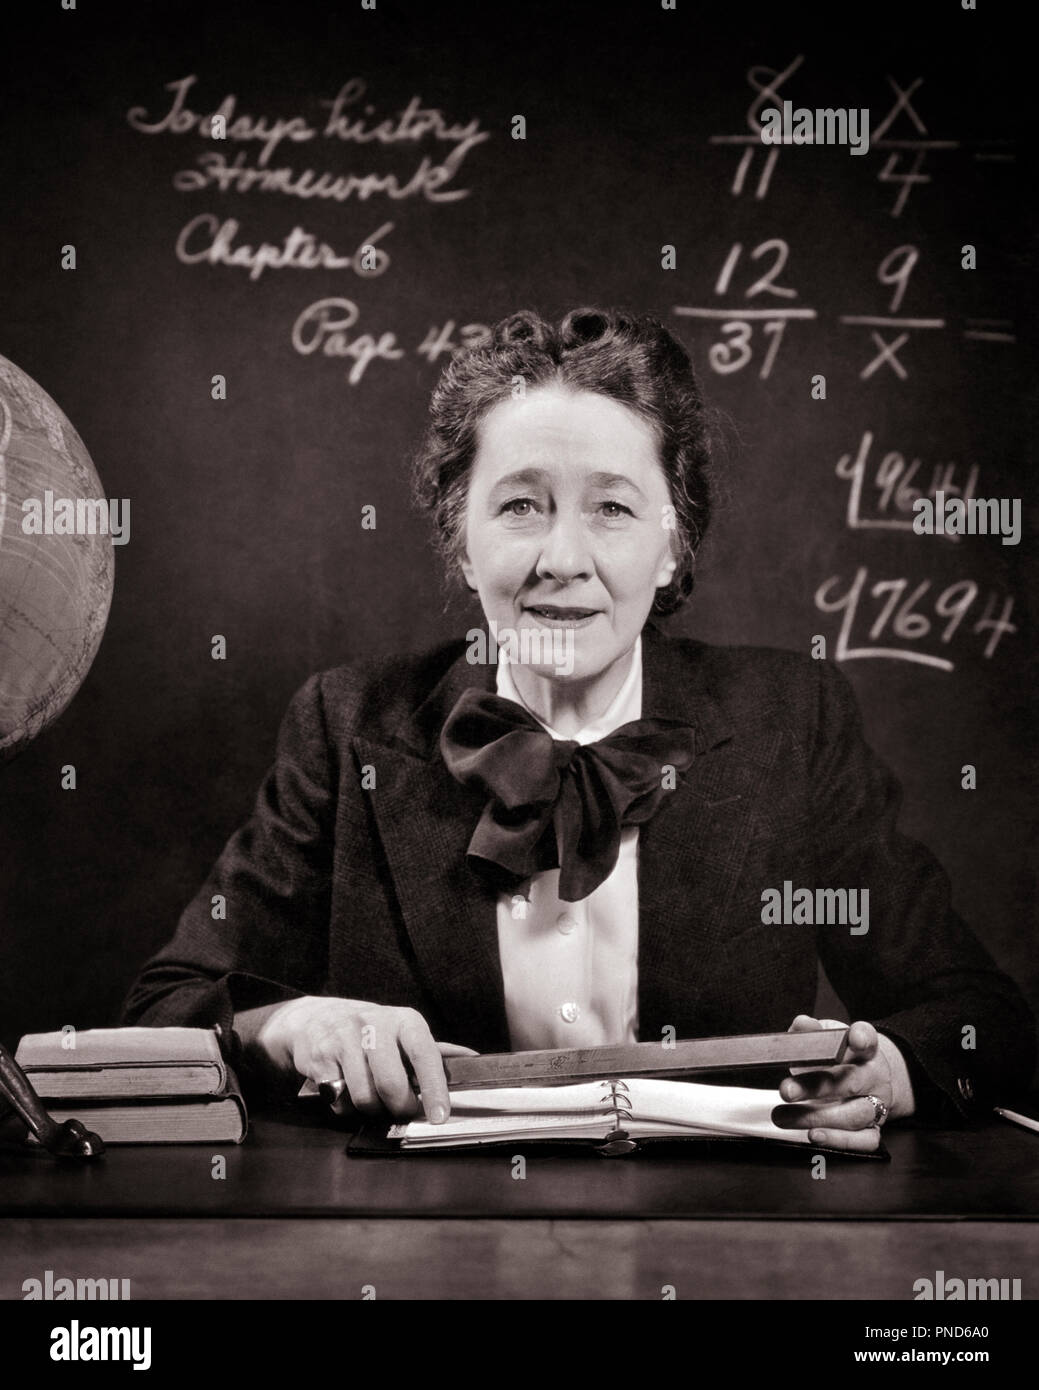 1940s SMILING MIDDLE AGED SCHOOL TEACHER AT DESK BESIDE GLOBE HOLDING RULER LOOKING AT CAMERA MATH ON BLACKBOARD - s11689 HAR001 HARS FEMALES LADIES PERSONS INSPIRATION CARING CONFIDENCE EXPRESSIONS B&W MATHEMATICS EYE CONTACT NICE HEAD AND SHOULDERS CHEERFUL STRENGTH RULER KNOWLEDGE POWERFUL STERN PRIDE AT ON AUTHORITY OCCUPATIONS SMILES STRICT BESIDE JOYFUL OLD MAID PROBLEMS STYLISH MIDDLE AGE PLEASANT MID-ADULT MID-ADULT WOMAN PRECISION PRISSY BLACK AND WHITE CAUCASIAN ETHNICITY HAR001 OLD FASHIONED SEVERE Stock Photo